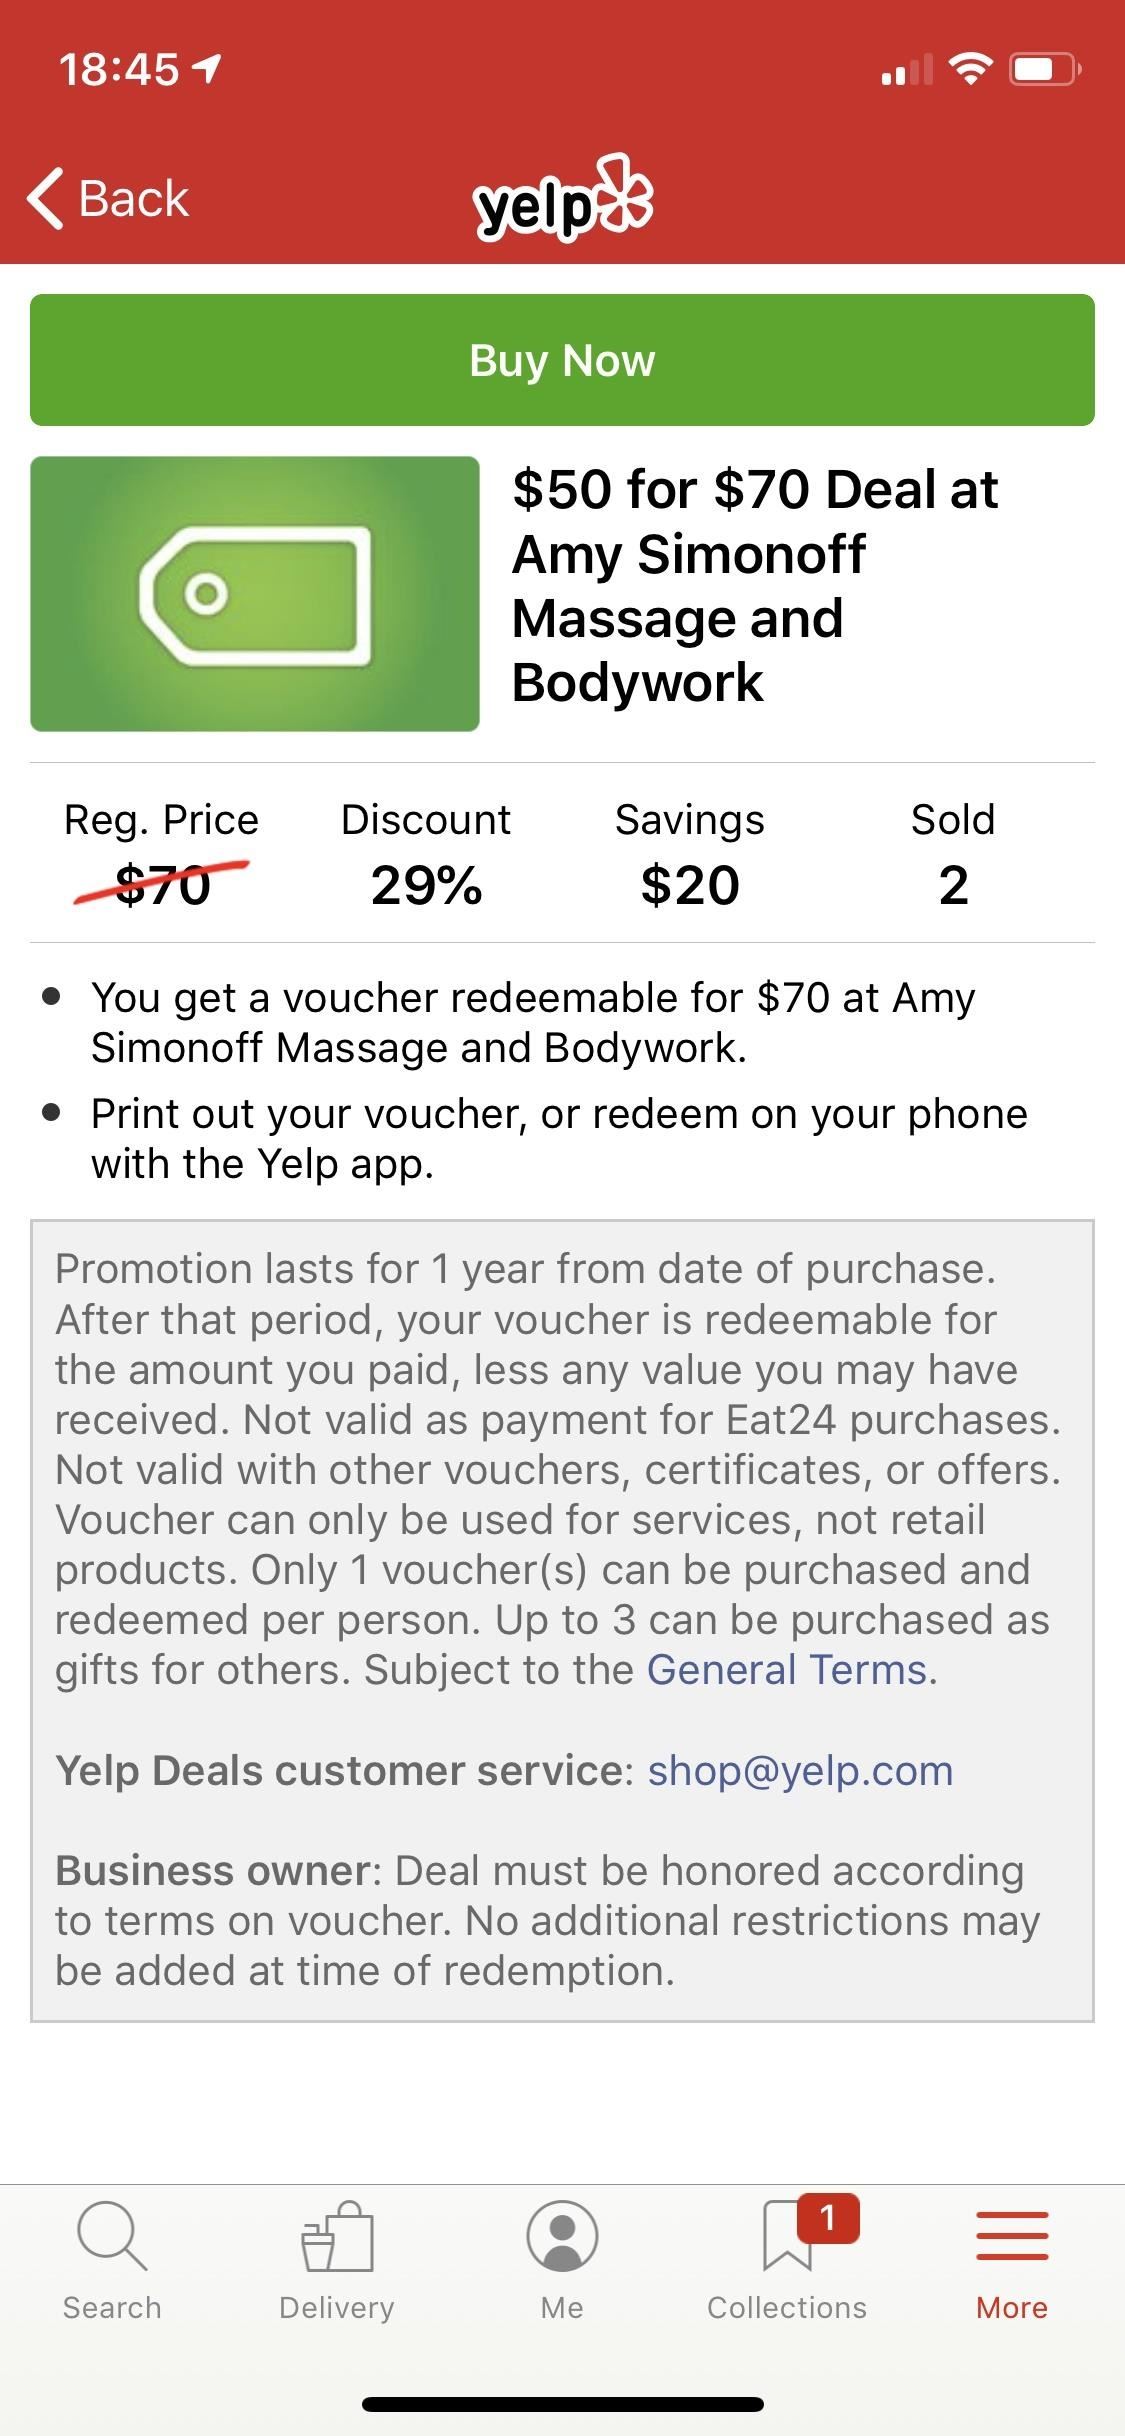 How to Find & Use Yelp Deals on Your Phone to Save Money When Dining Out, Shopping & More